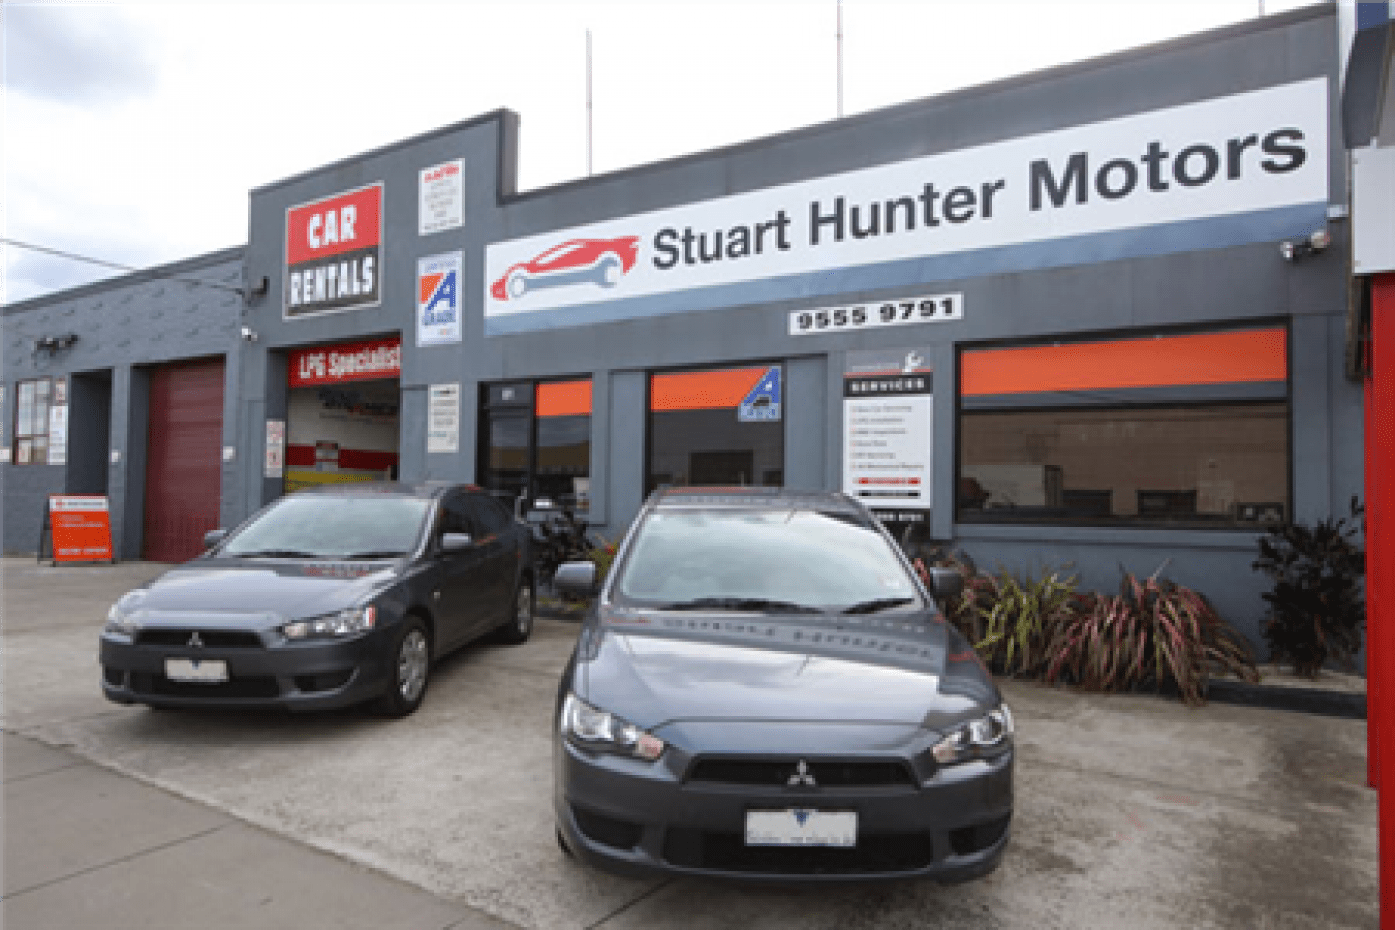 Mechanic Bentleigh East - At Stuart Hunter Motors, we provide a comprehensive range of car repairs and servicing for all makes and models.